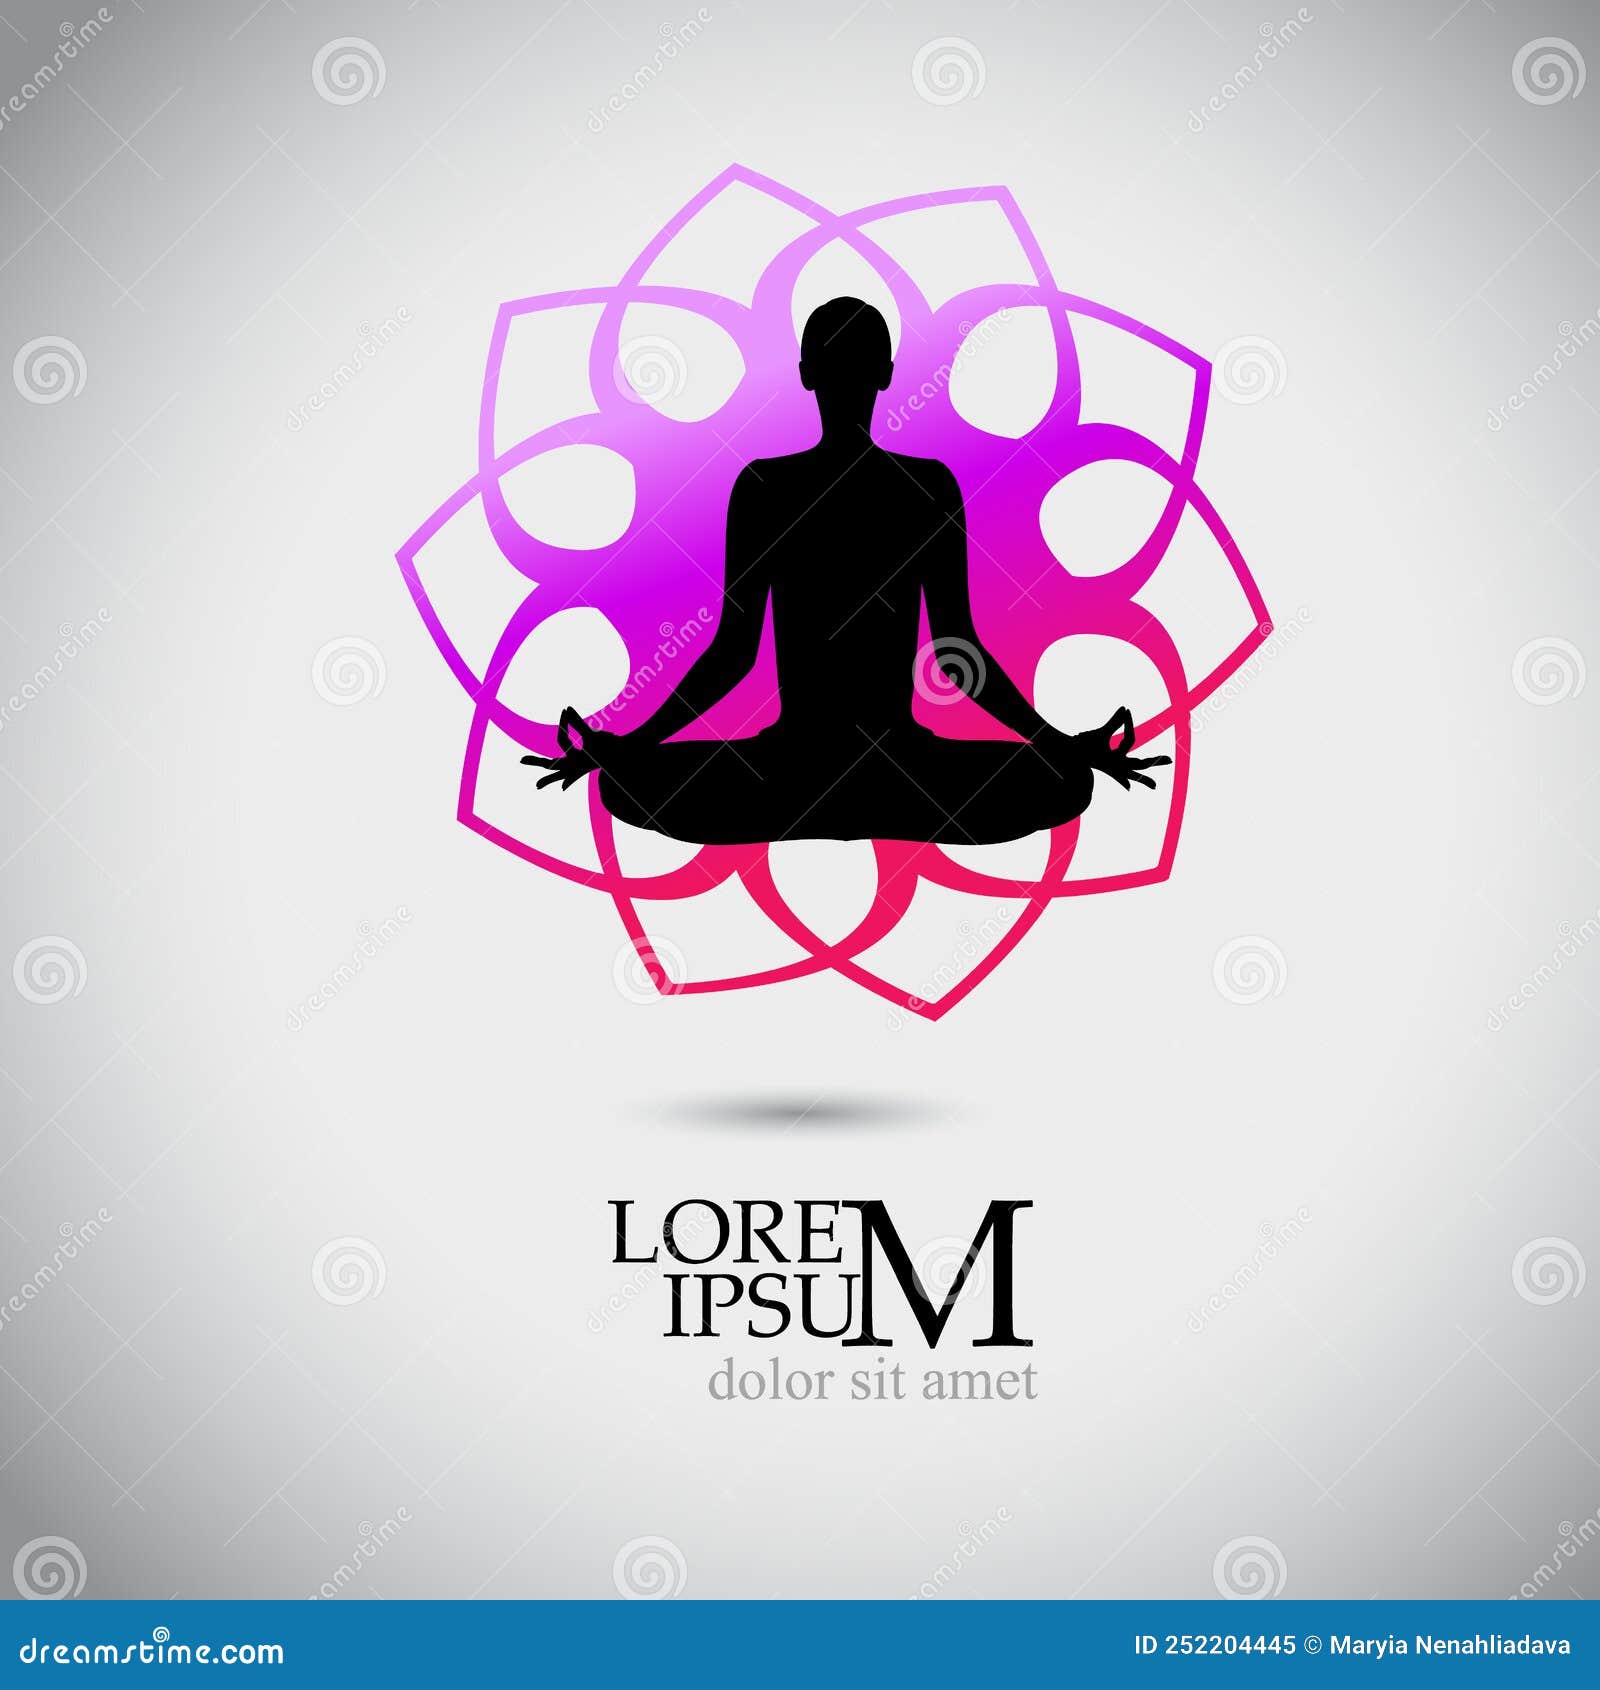 the lotus blossom position